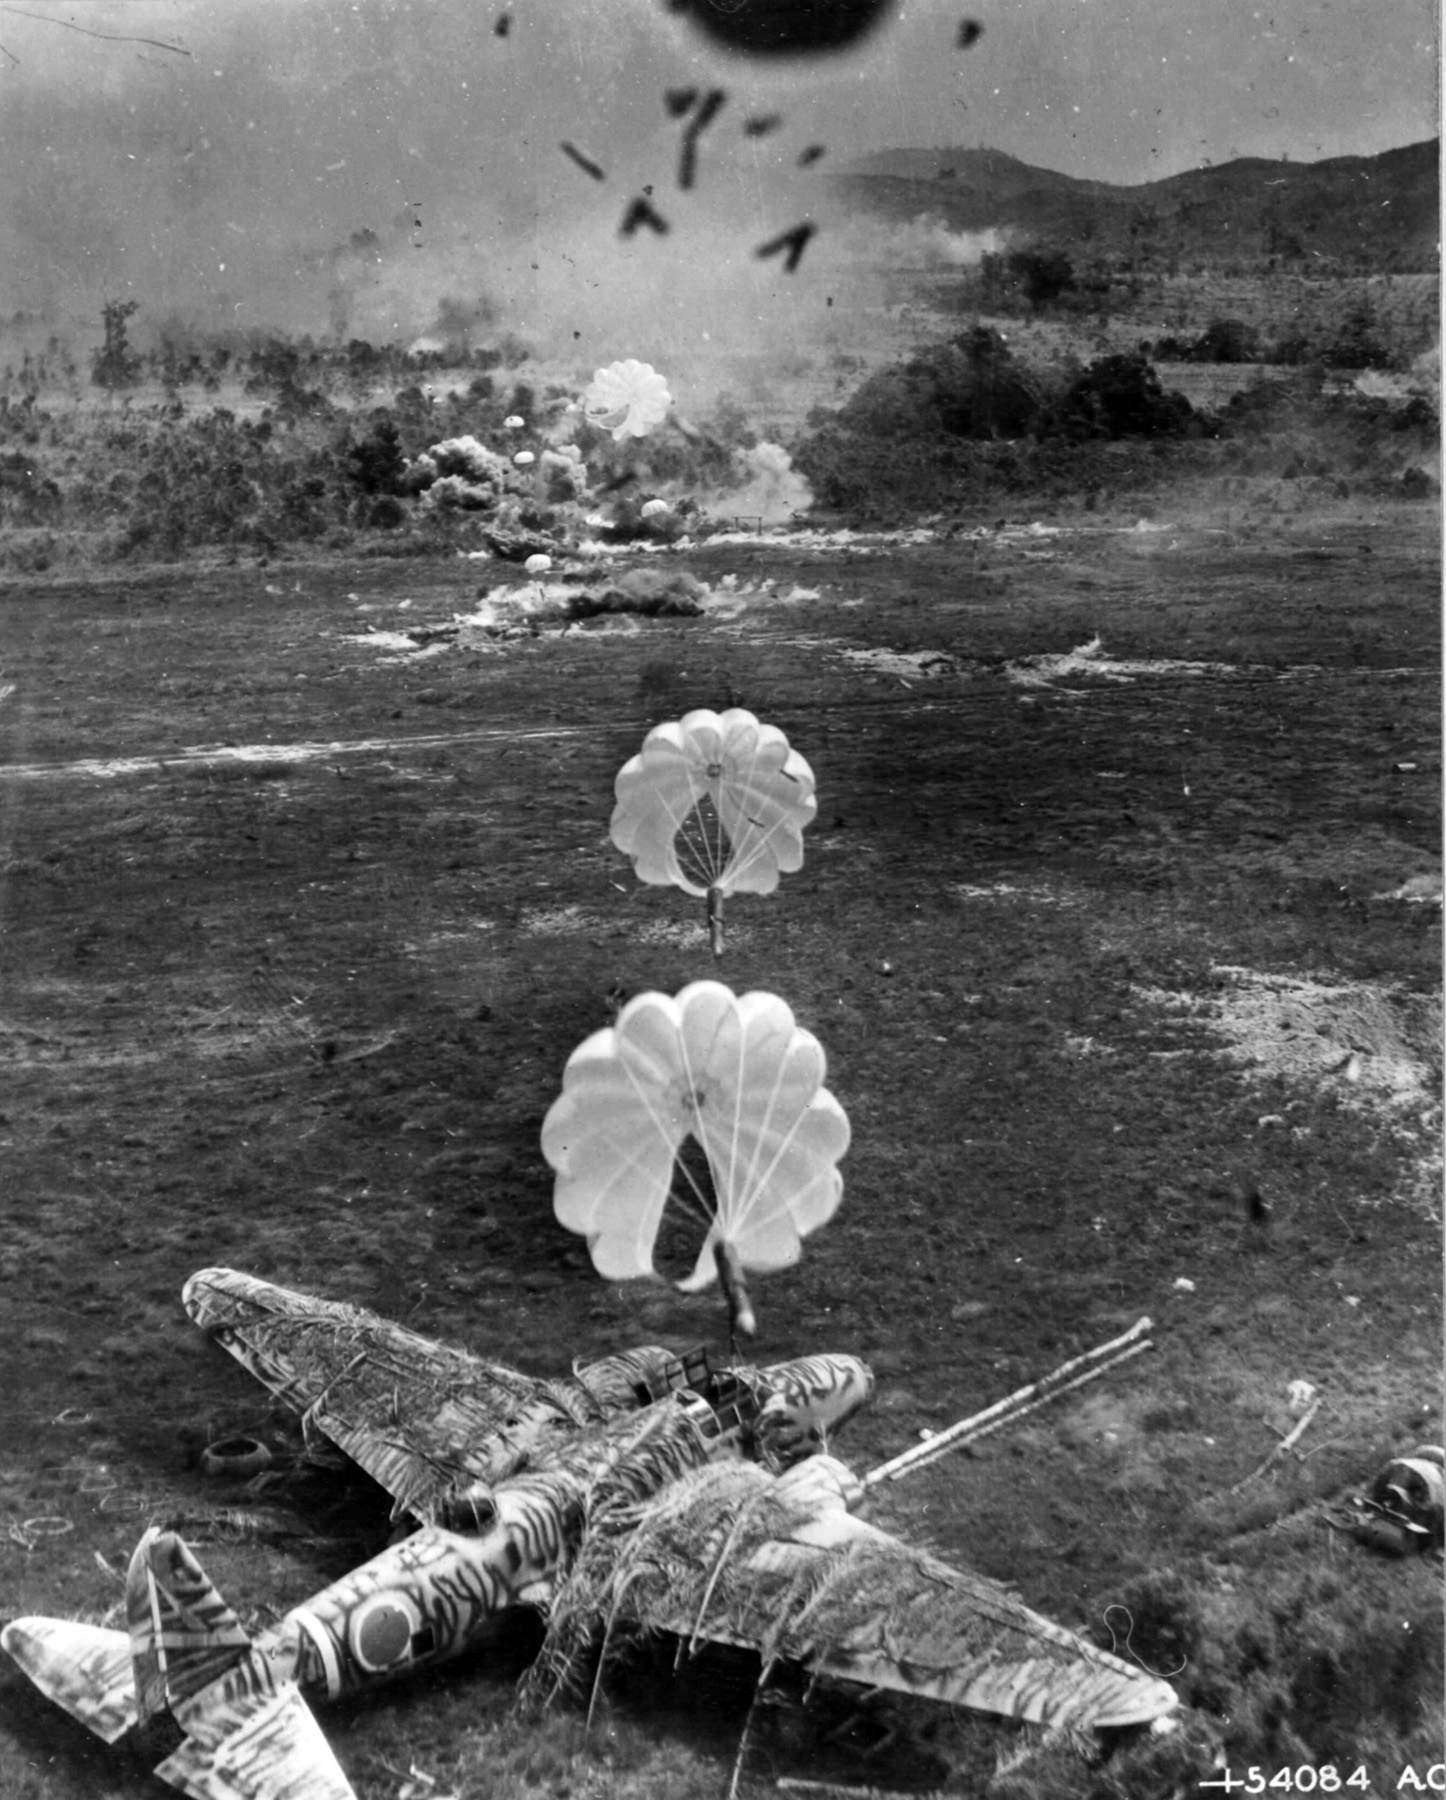 View from an American A-20 Havoc aircraft during a bomber run against a Japanese airfield, 1943-1945